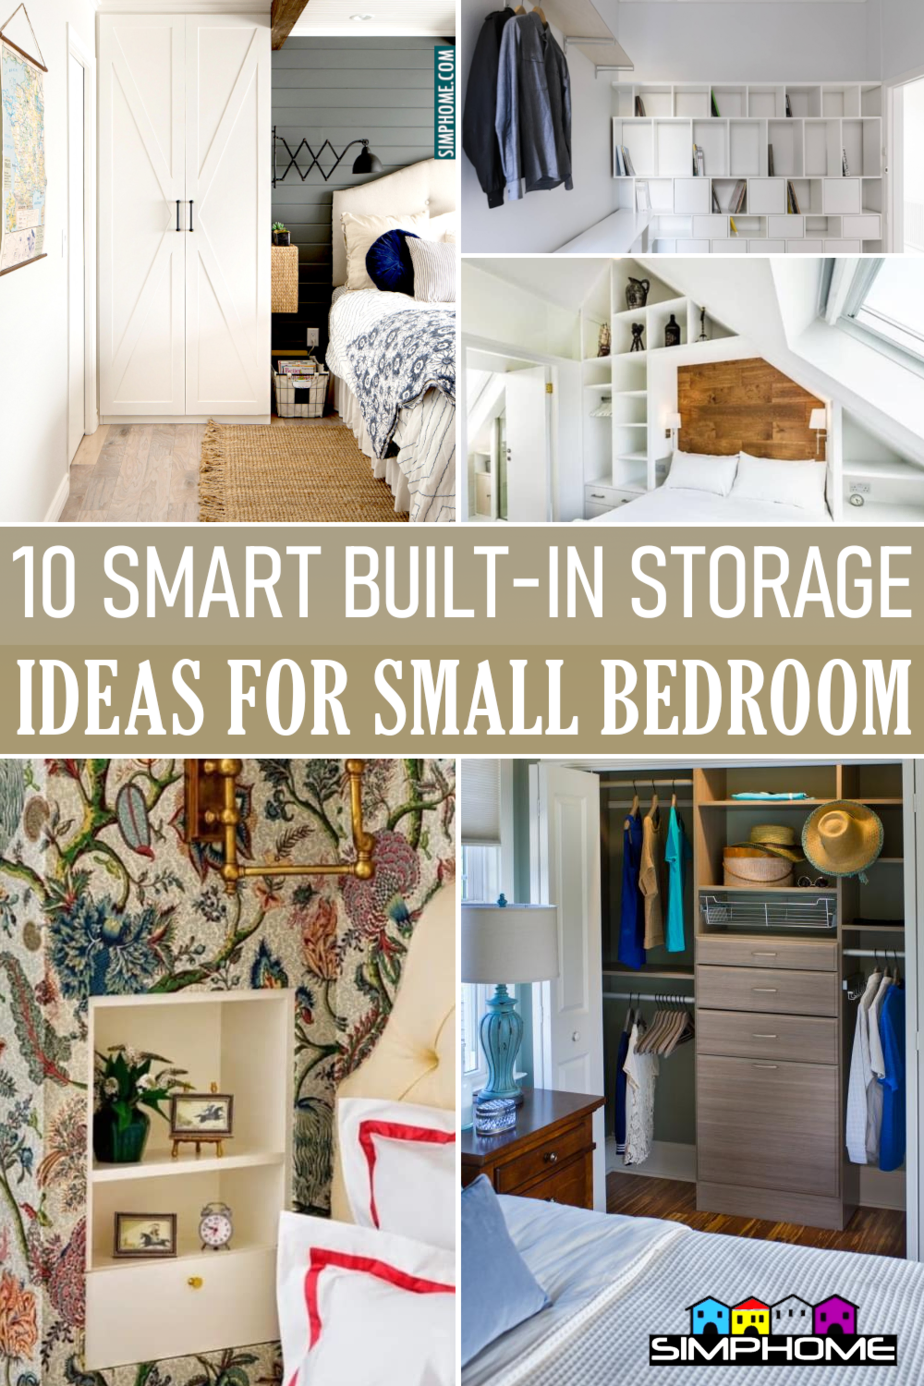 Smart Built In Storage Ideas for Bedroom via Simphome.comFeatured